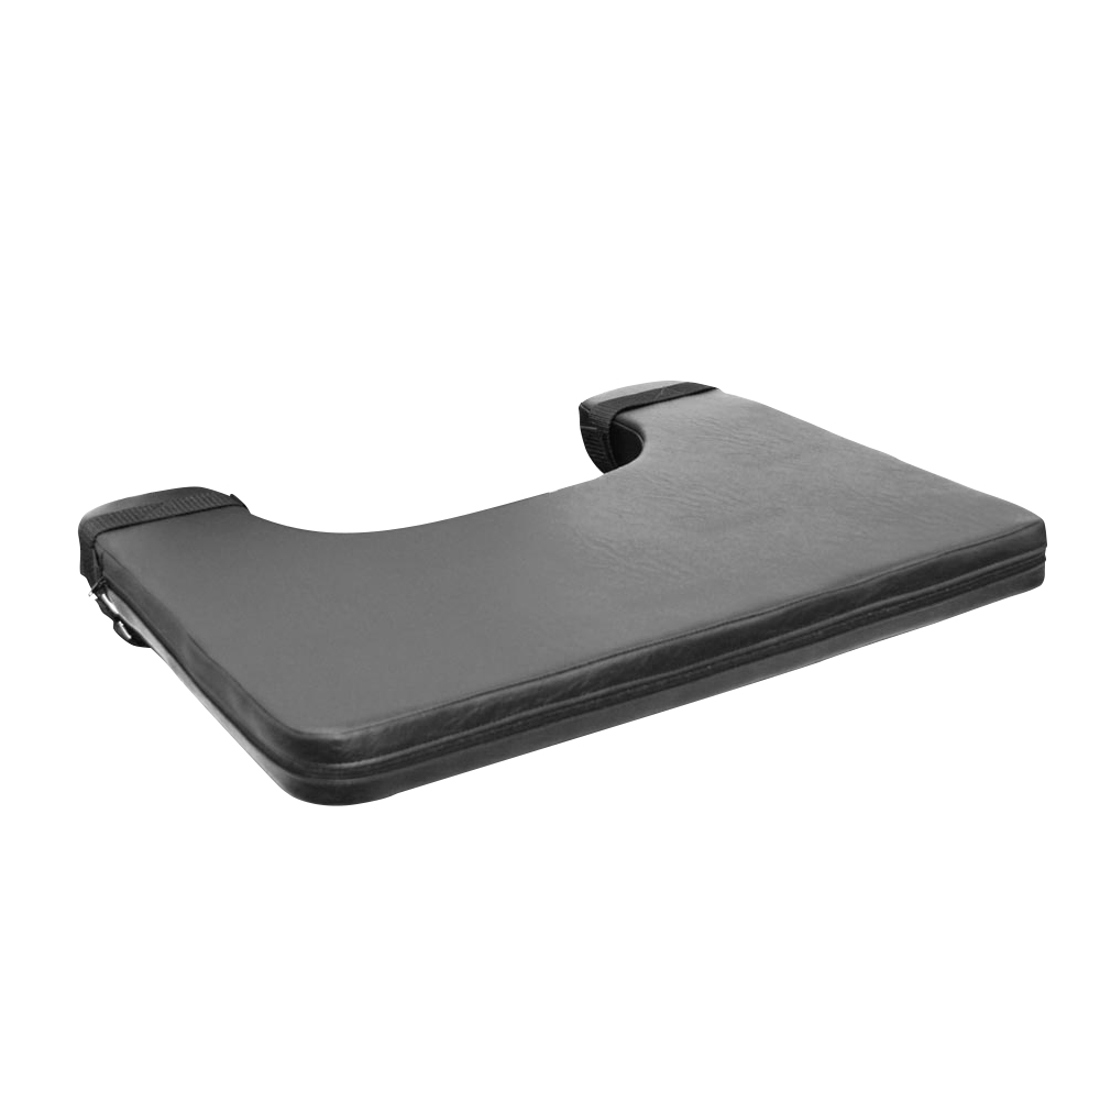 Upper Extremity Support Surface (Foam Tray)